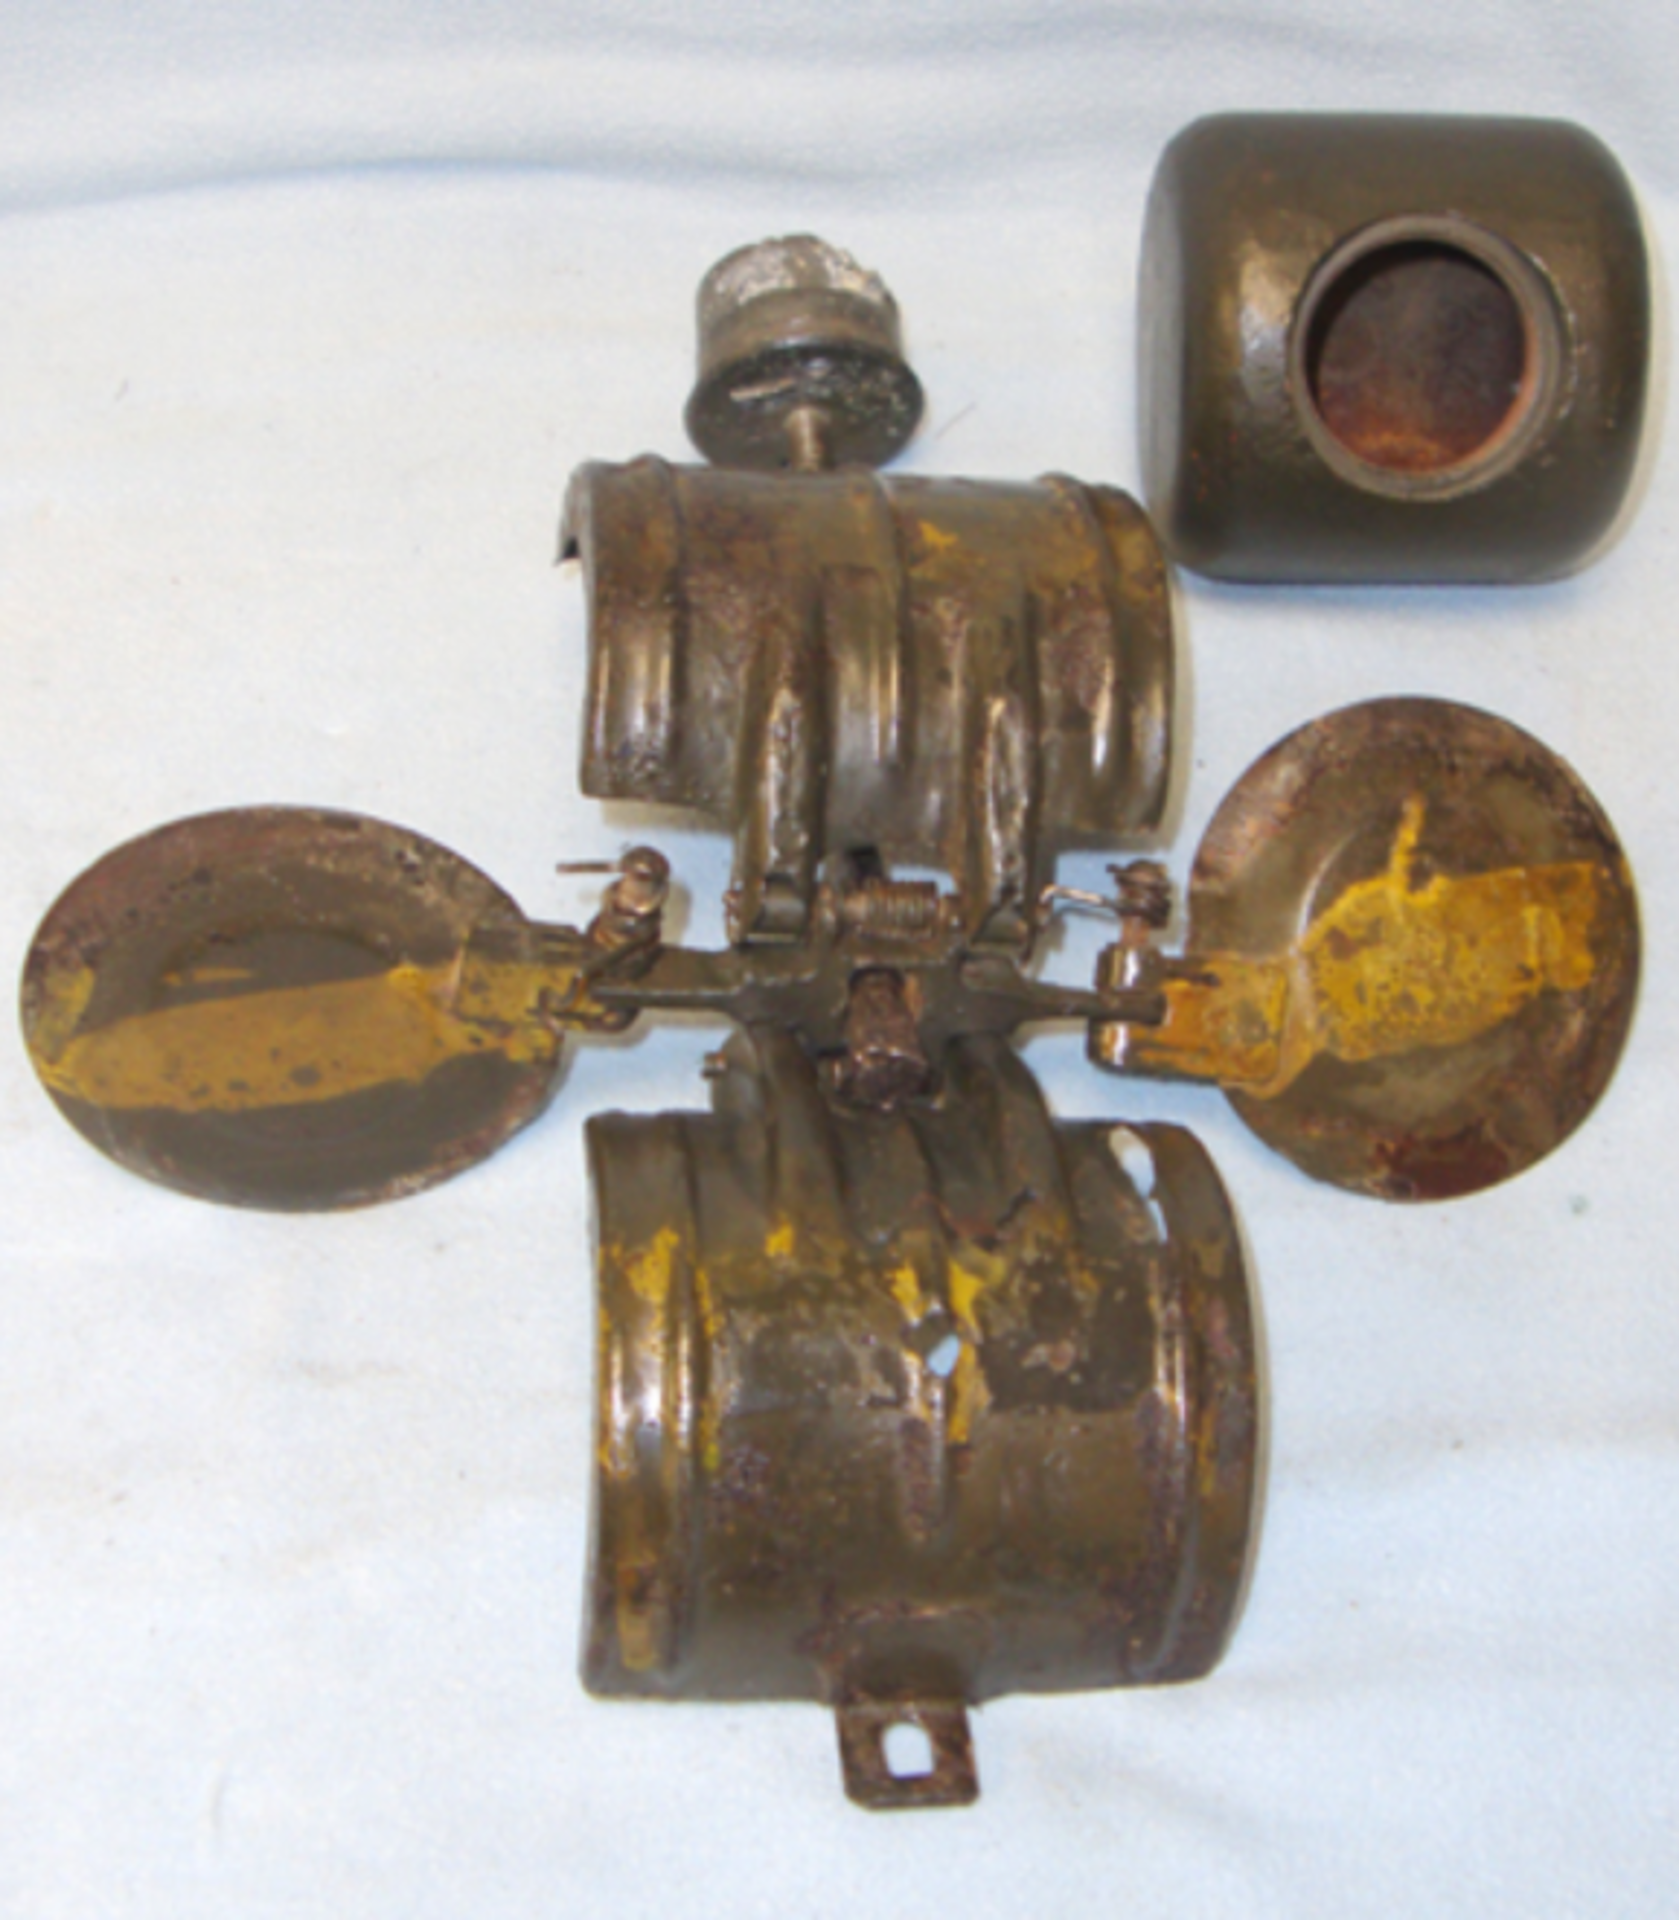 RARE, WW2 1941 German SD2 (Sprengbombe Dickwandig 2Kg) Anti Personnel Butterfly Bomb - Image 3 of 3